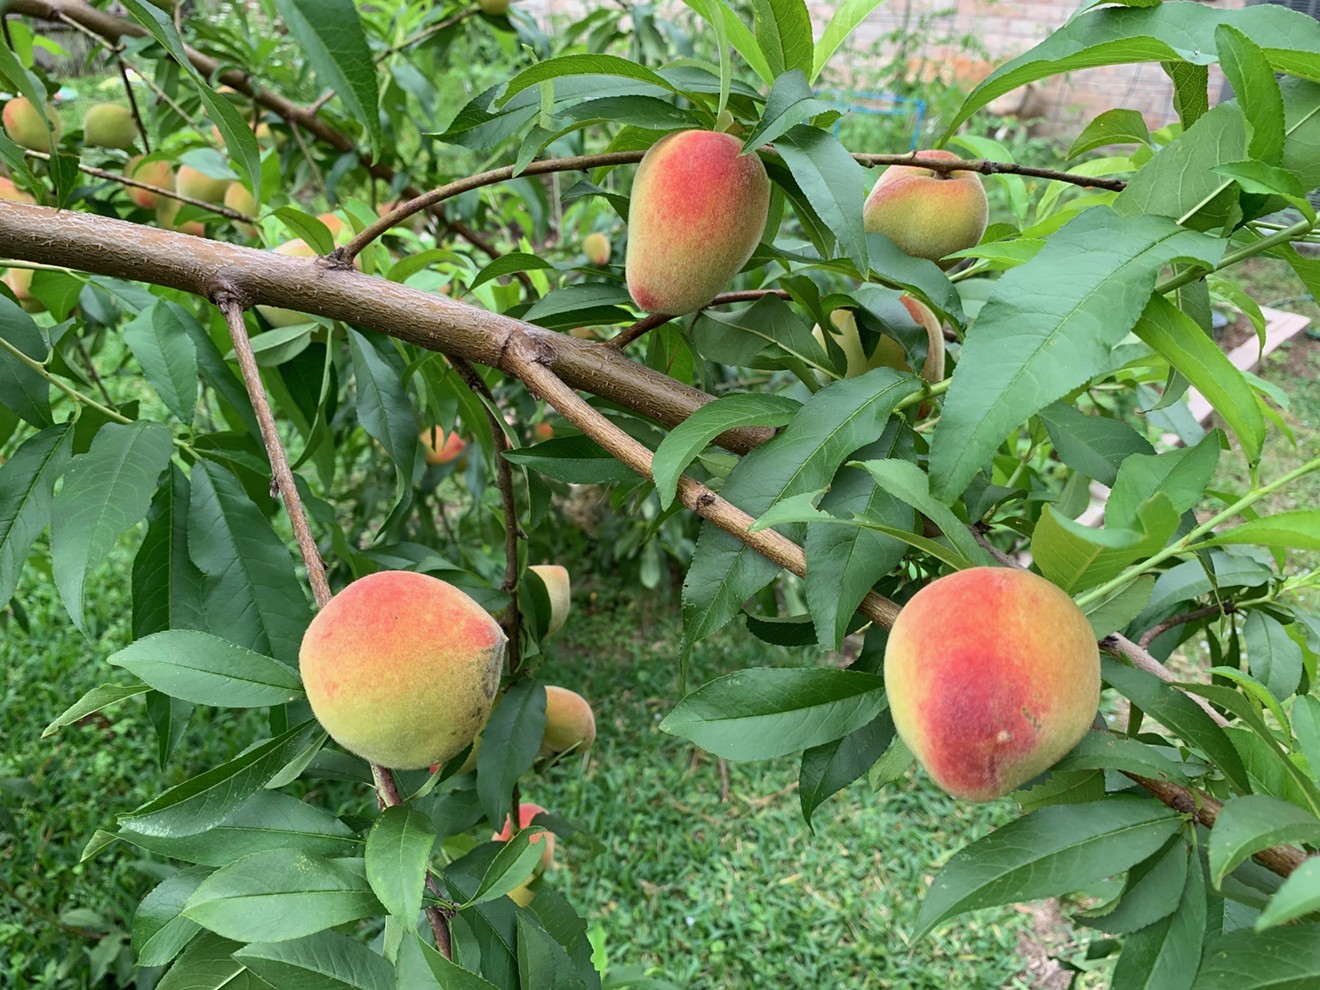 It's gardener versus critters for the ripening peaches.